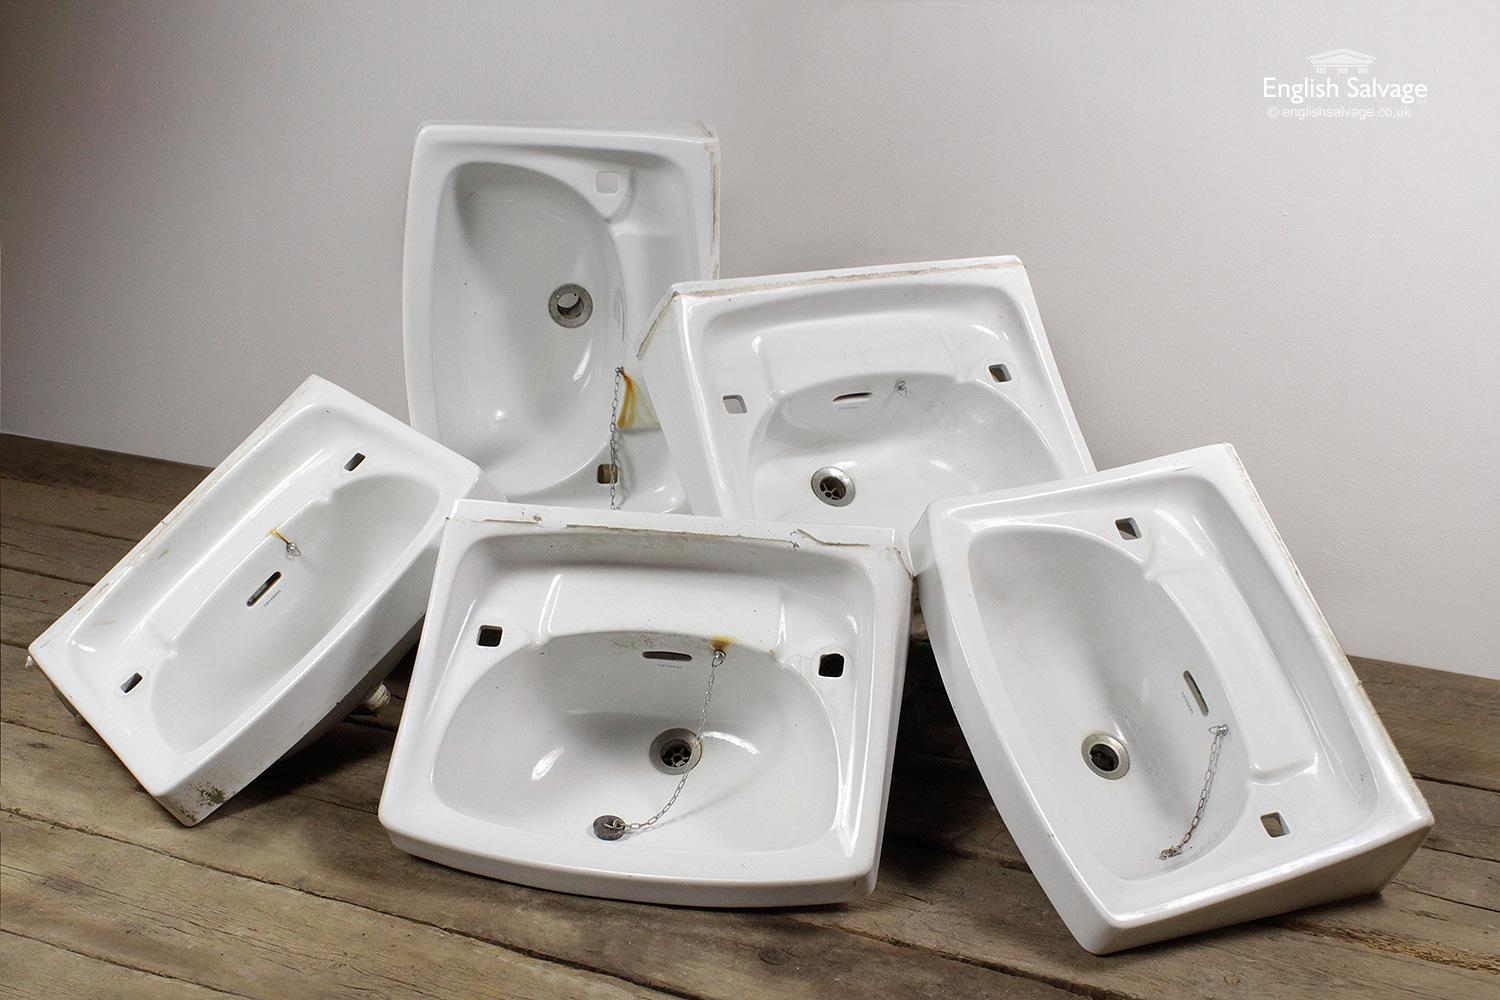 Matching vintage Twyfords wash basins or sinks. All have two tap holes, wastes and overflows. Height given of 33cm includes the waste outlet, the basin sides are 14cm high. Hairline cracks, rust marks and scuffs and old silicone present.